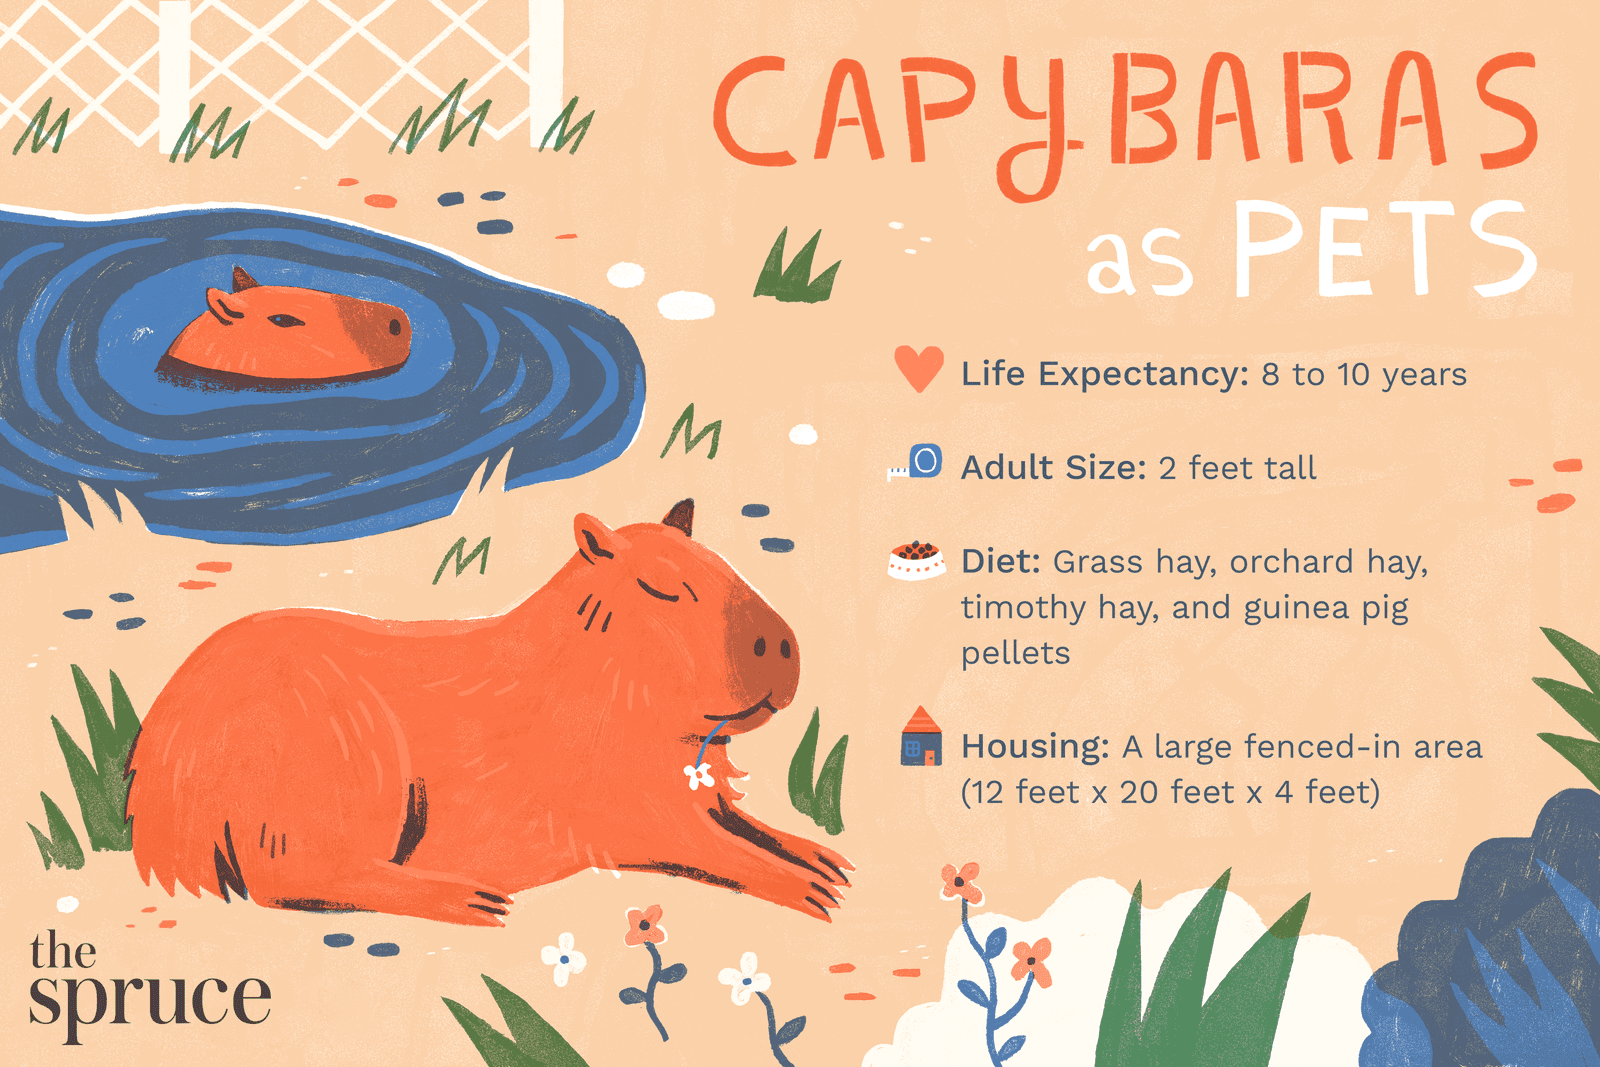 Capybara as a Pet in the UK: Rules and Regulations